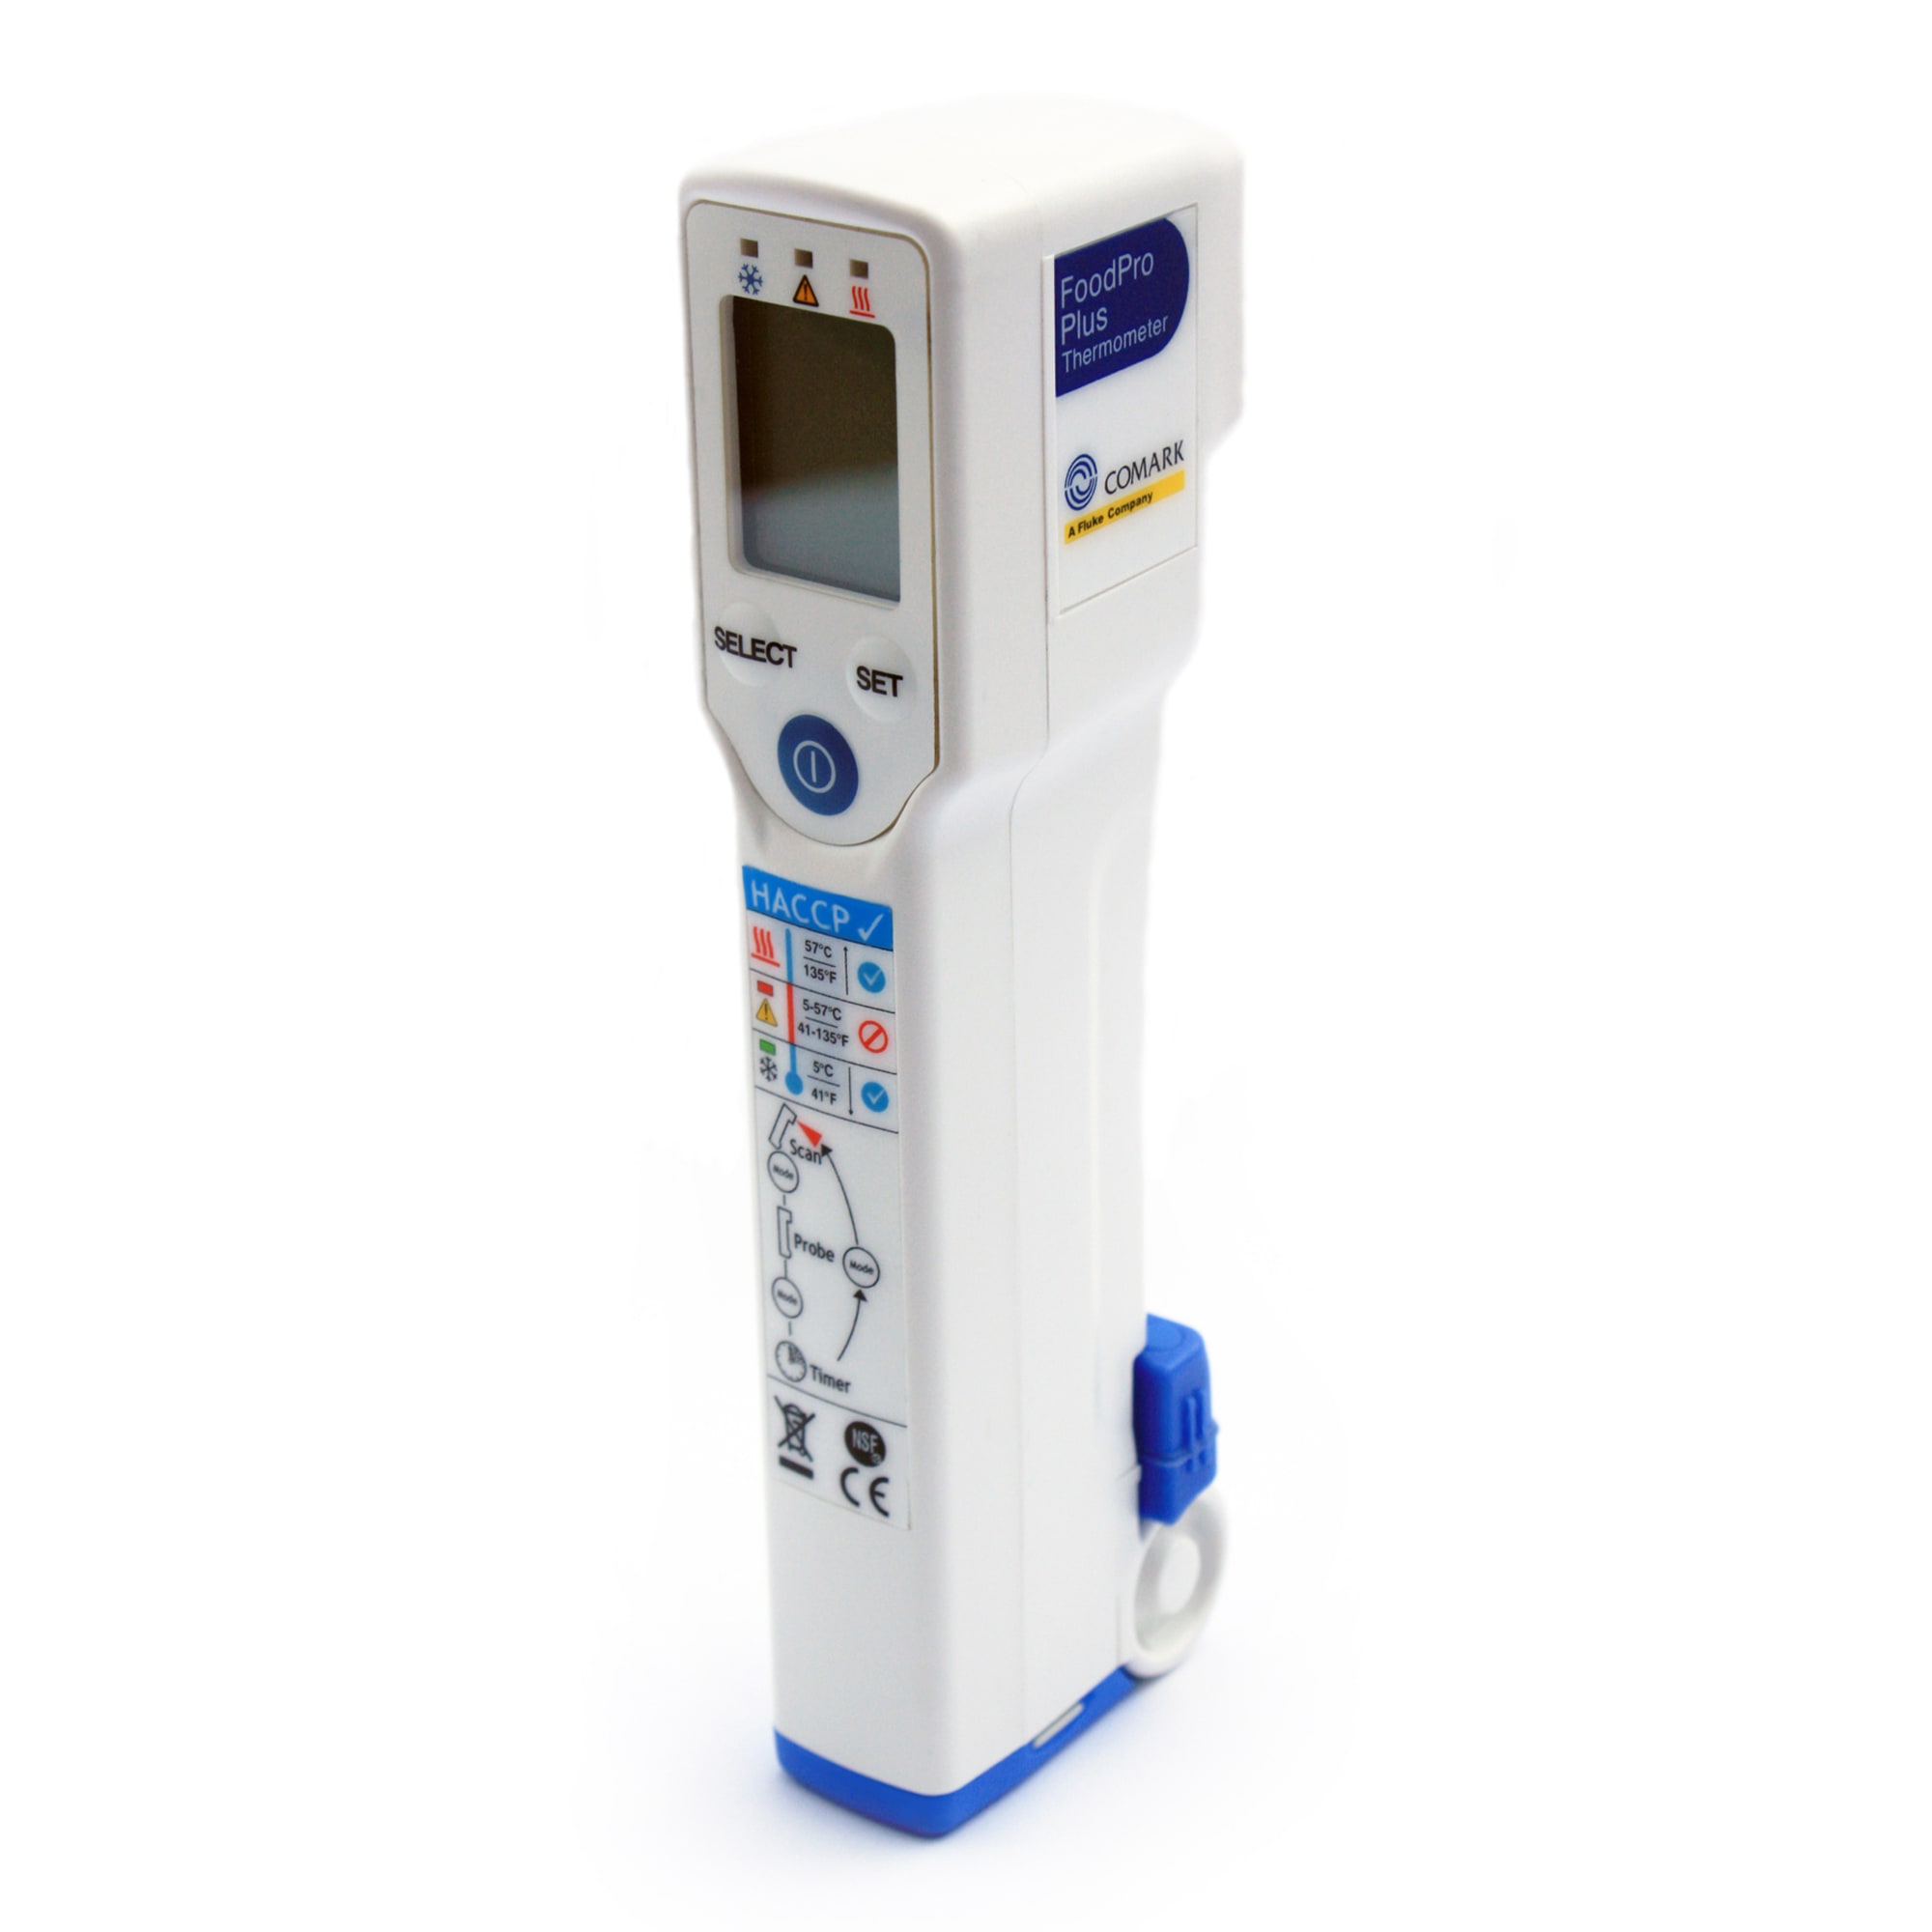 Infrared Food Thermometer, Fluke FoodPro Thermometer